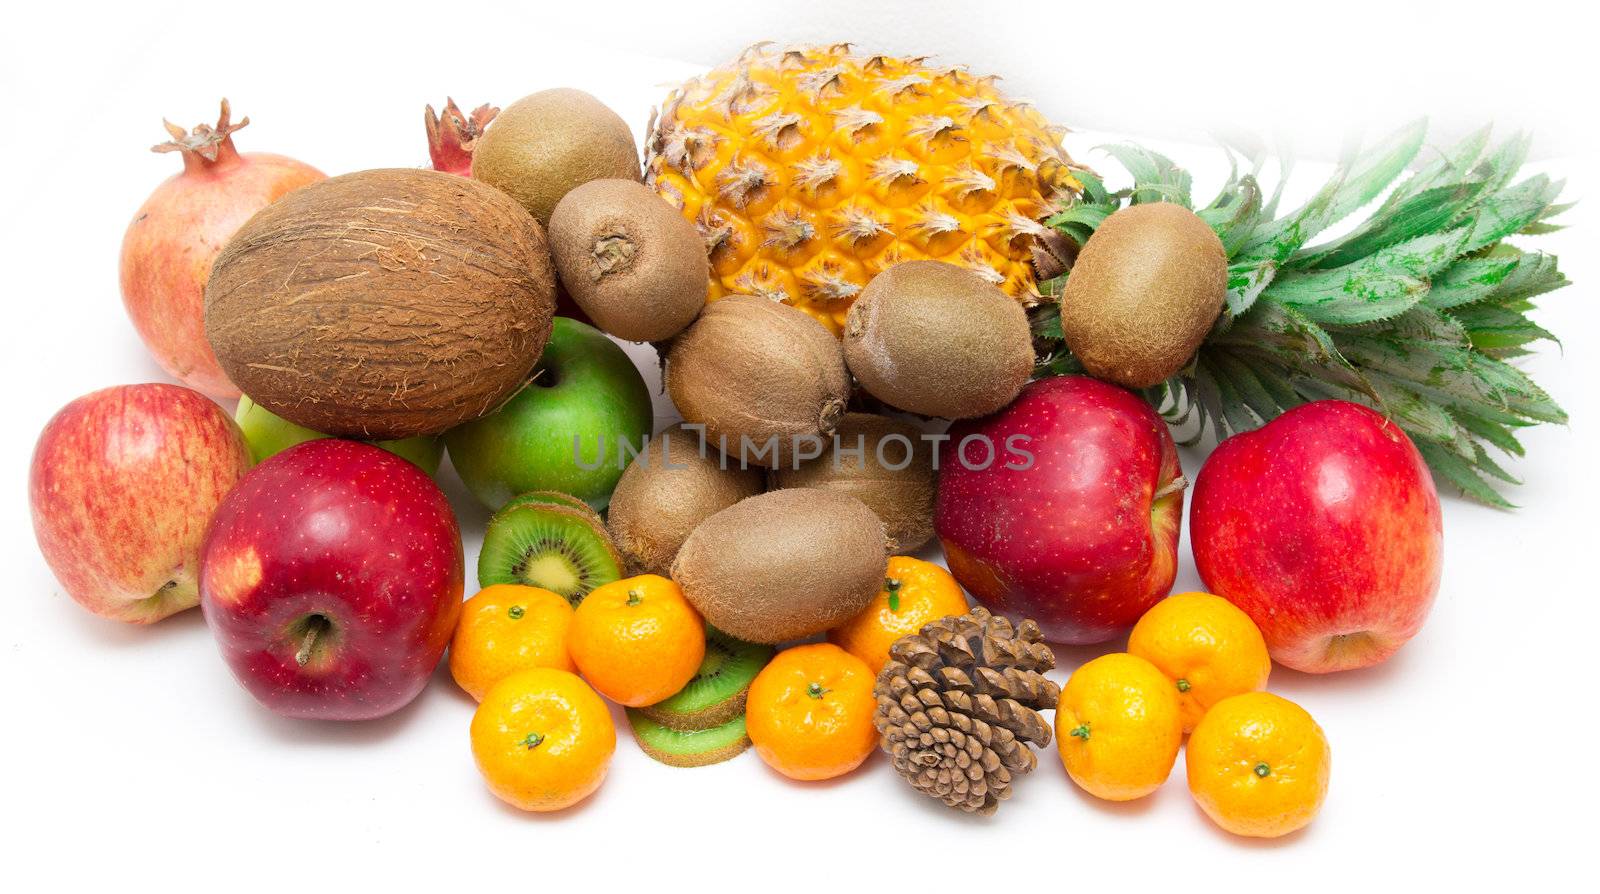 Vegetables and fruit on a white background by schankz